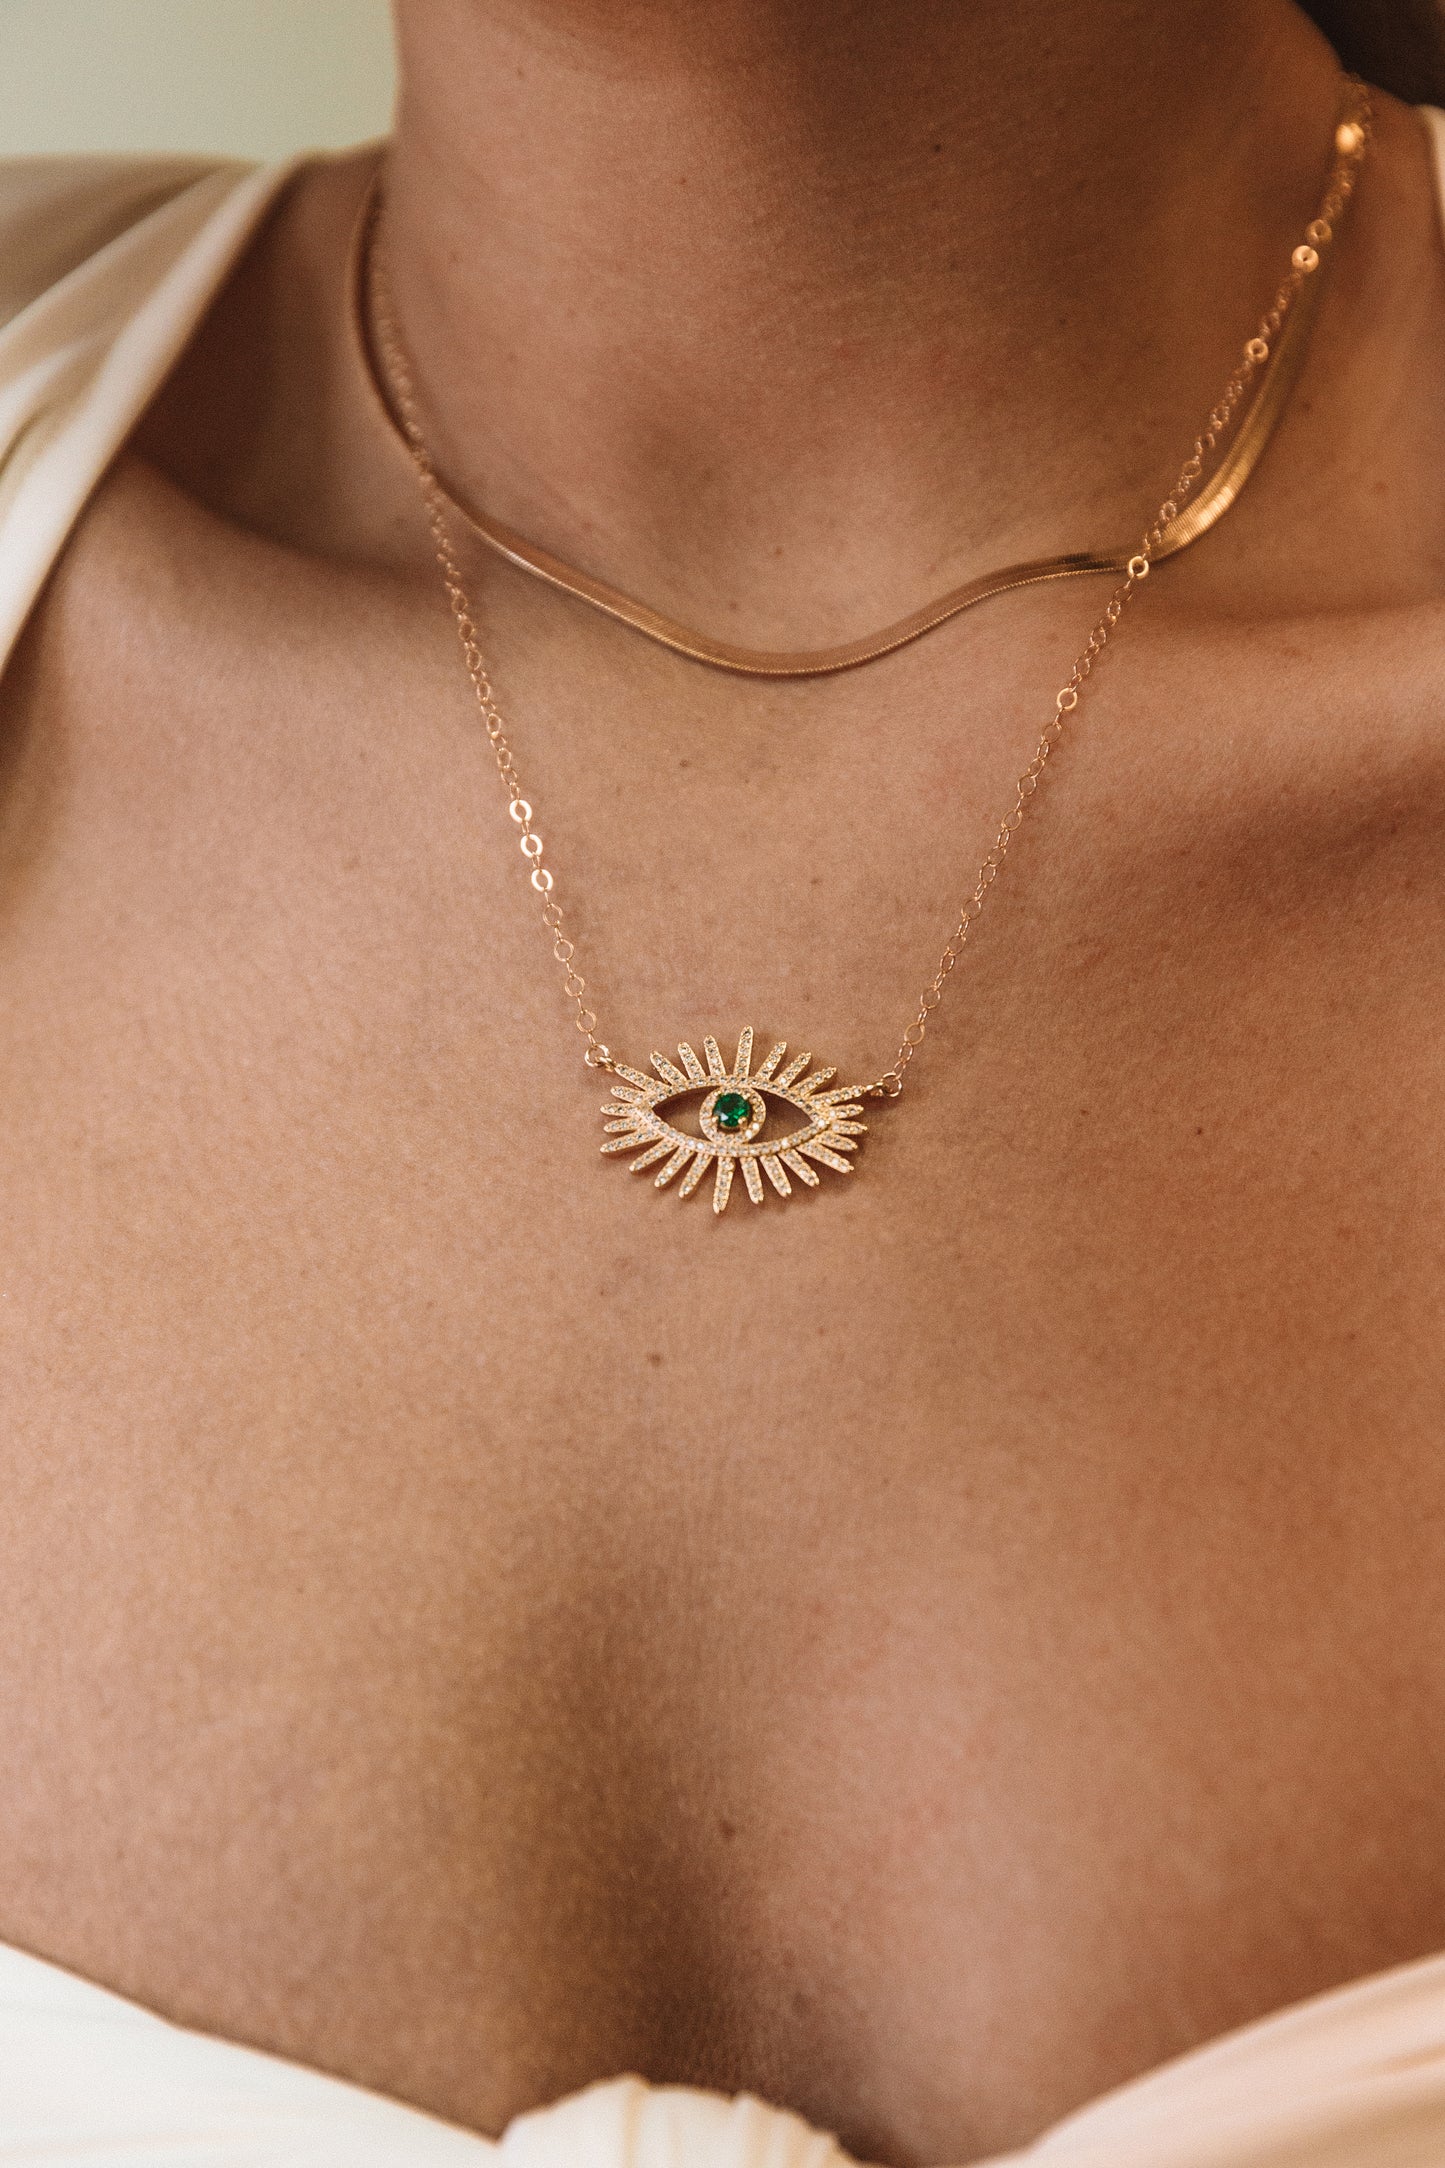 The Emerald Evil Eye Necklace